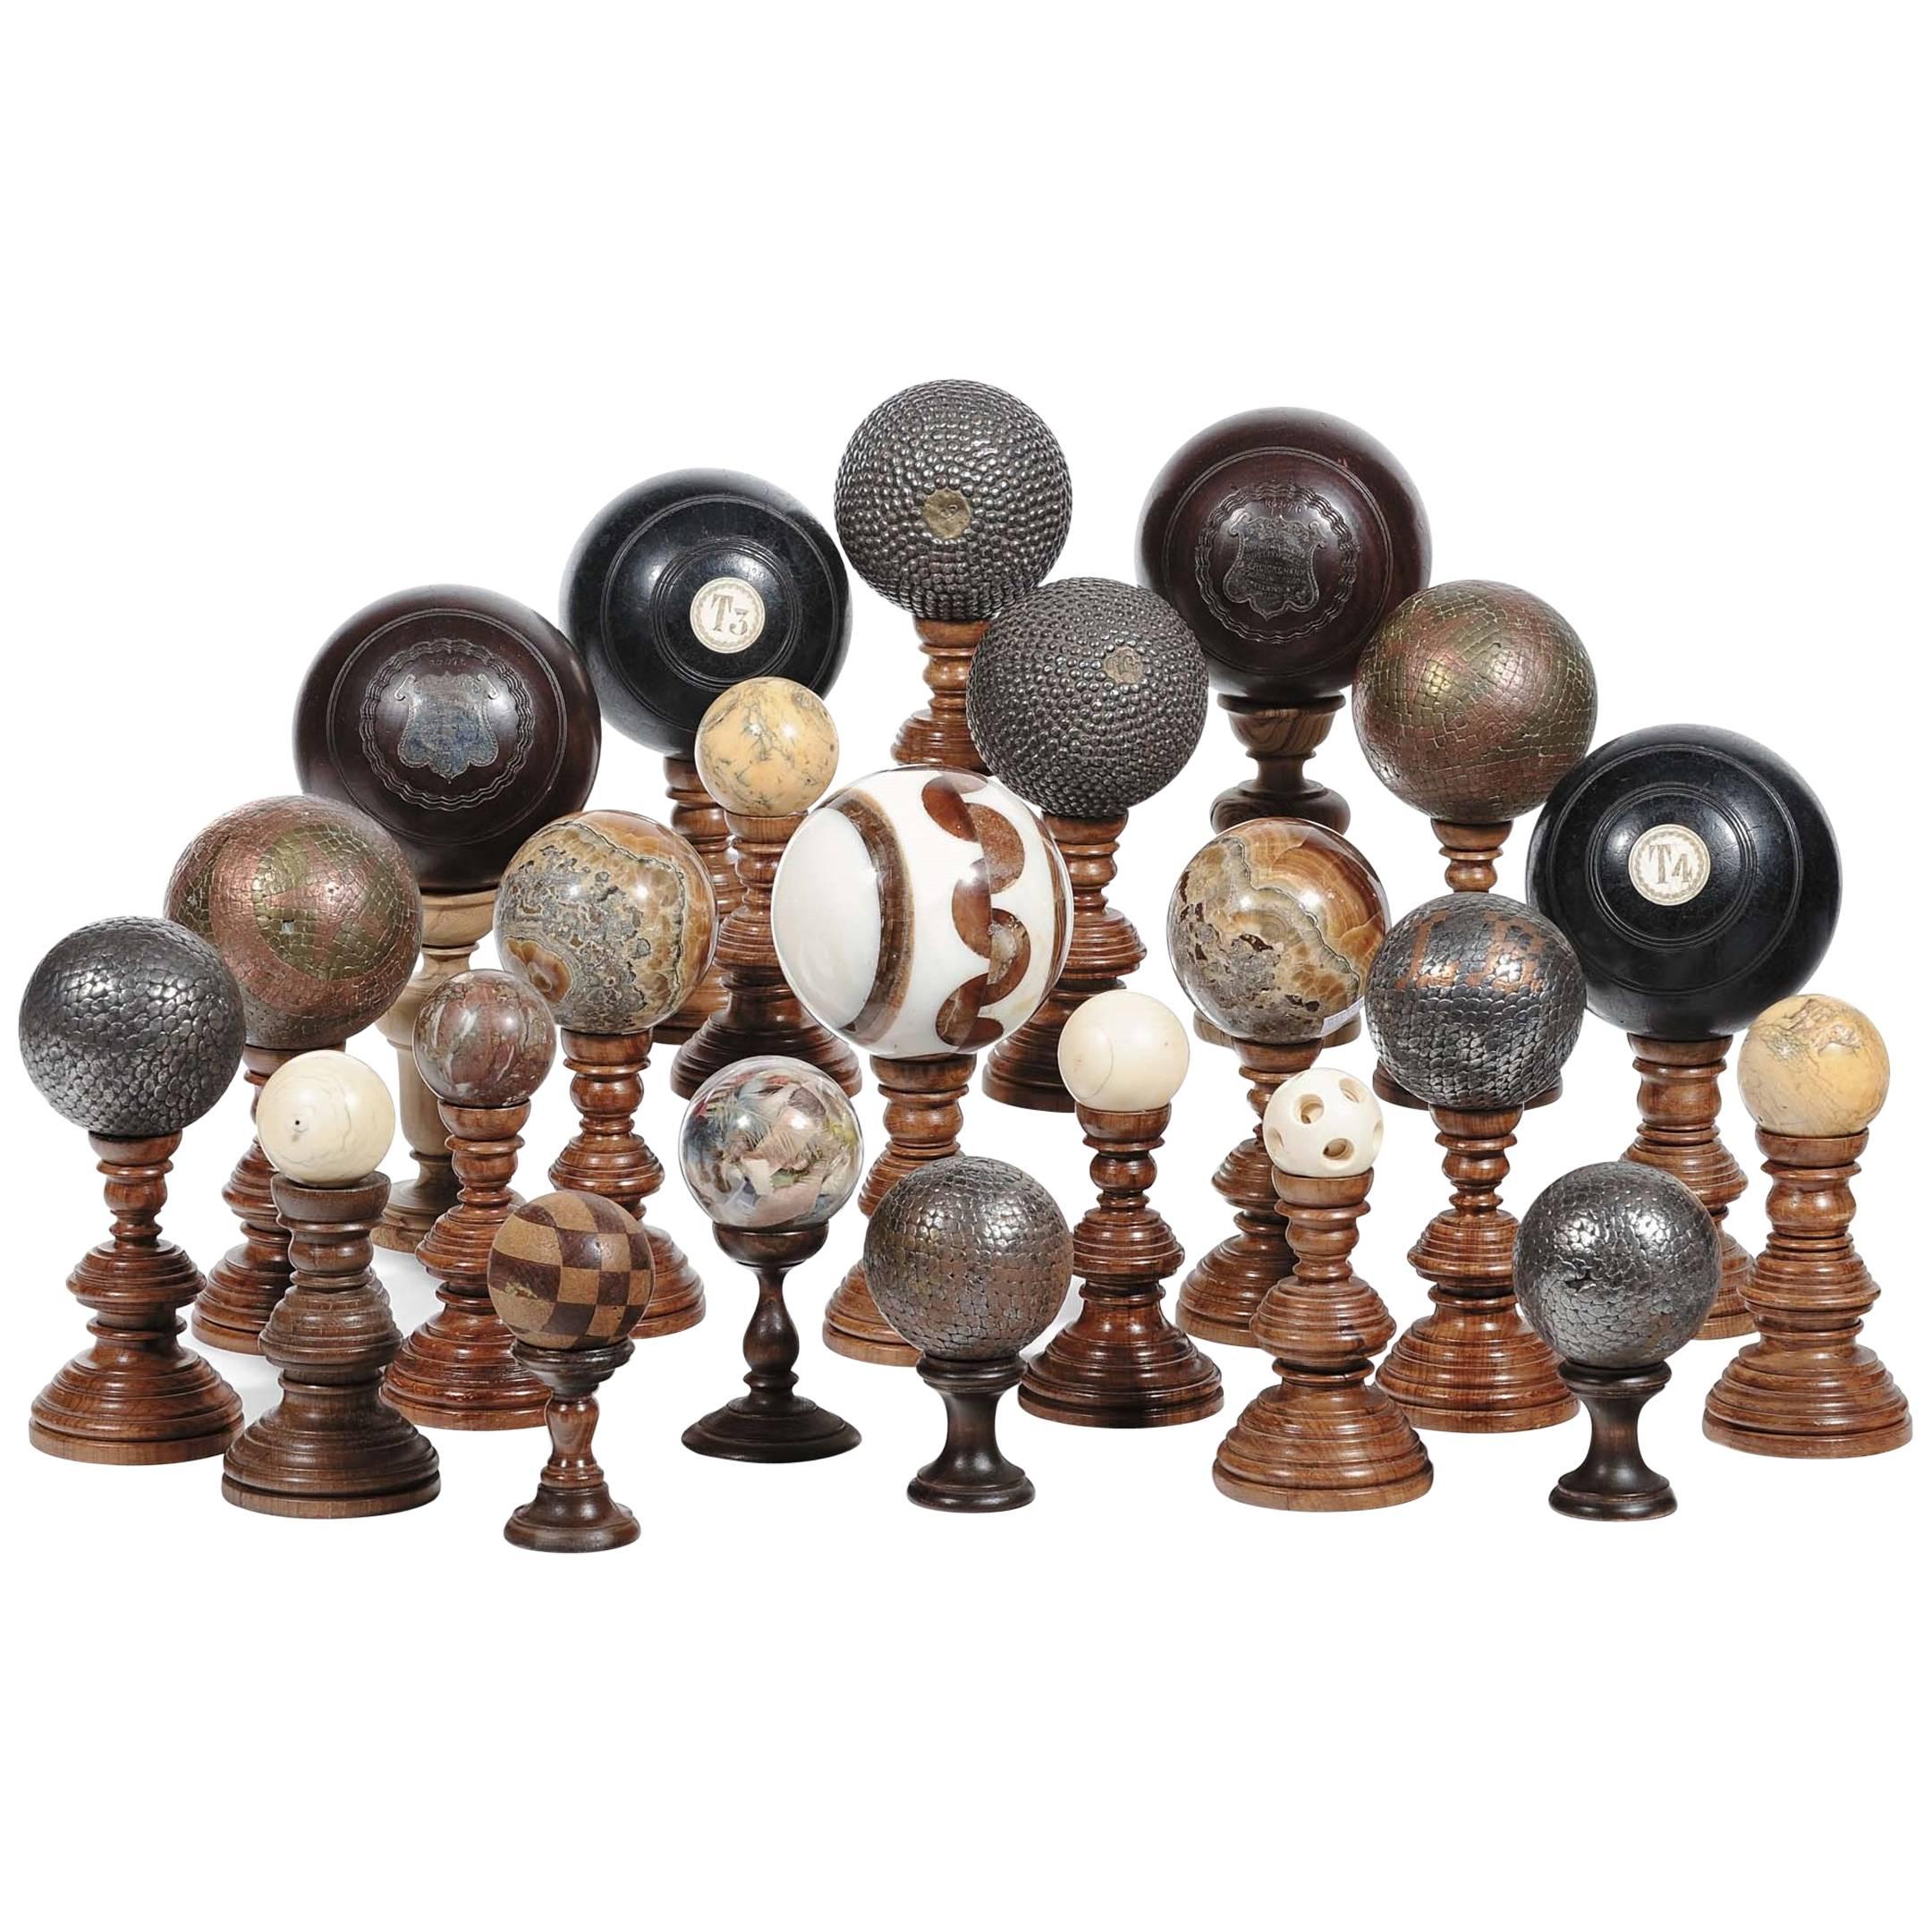 Set of 23 Collectible Crafted Globes in Stone and Marble